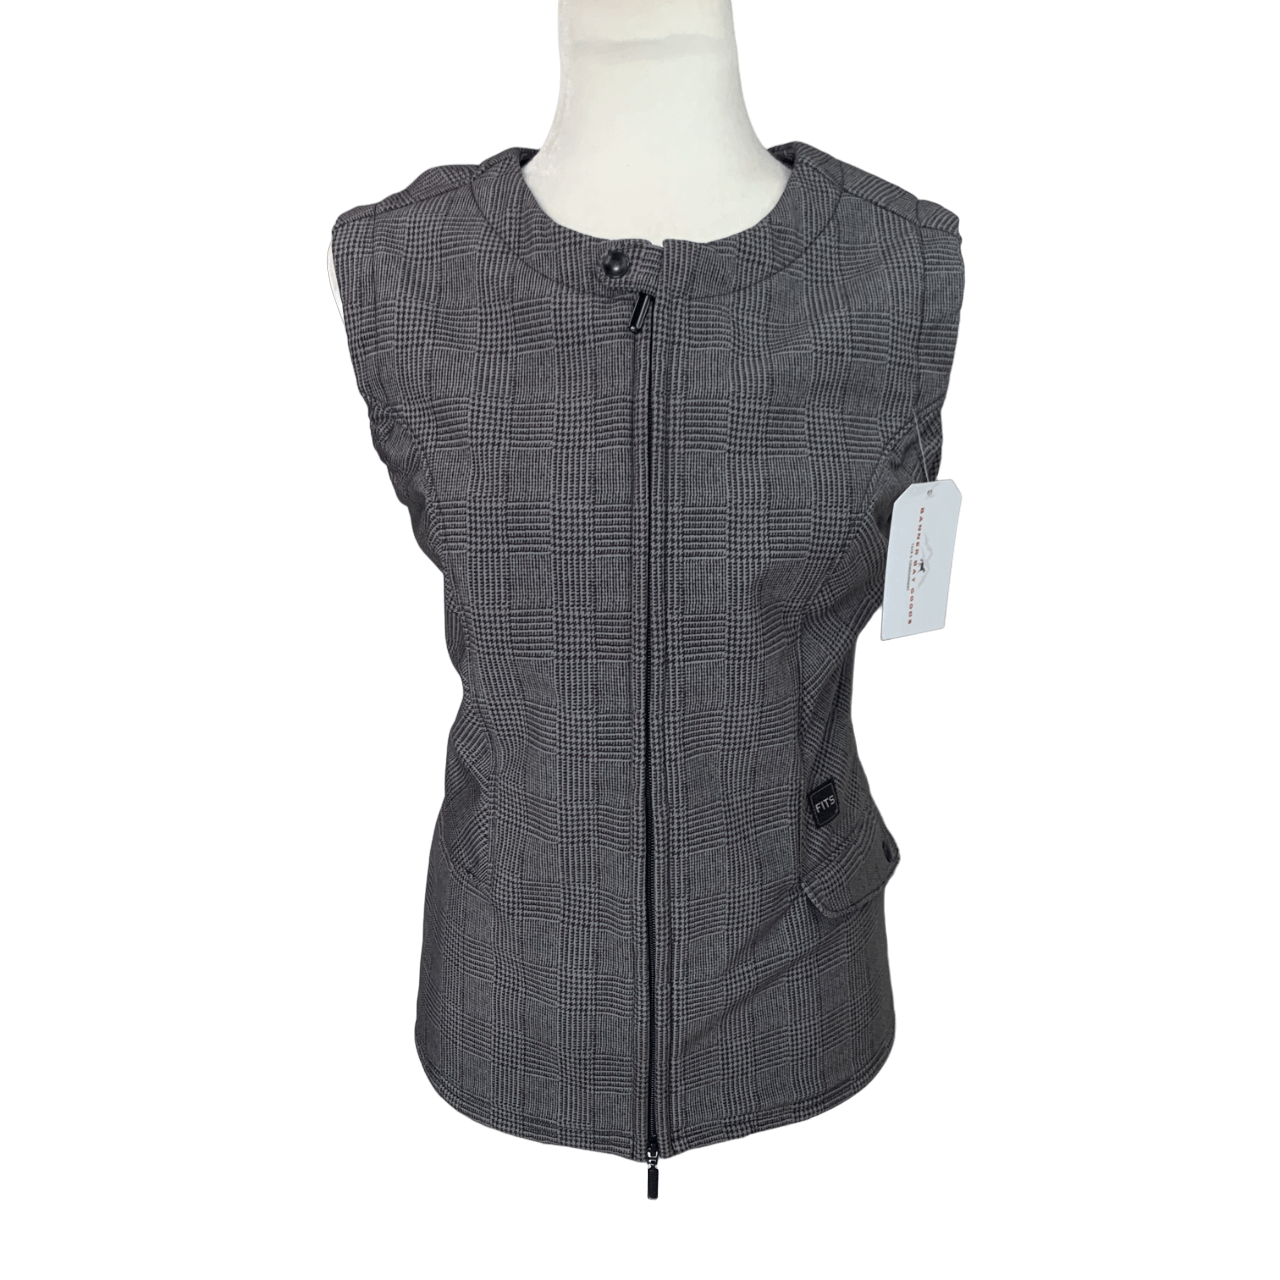 FITS 'Allie' Riding Vest in Grey - Woman's X-Large